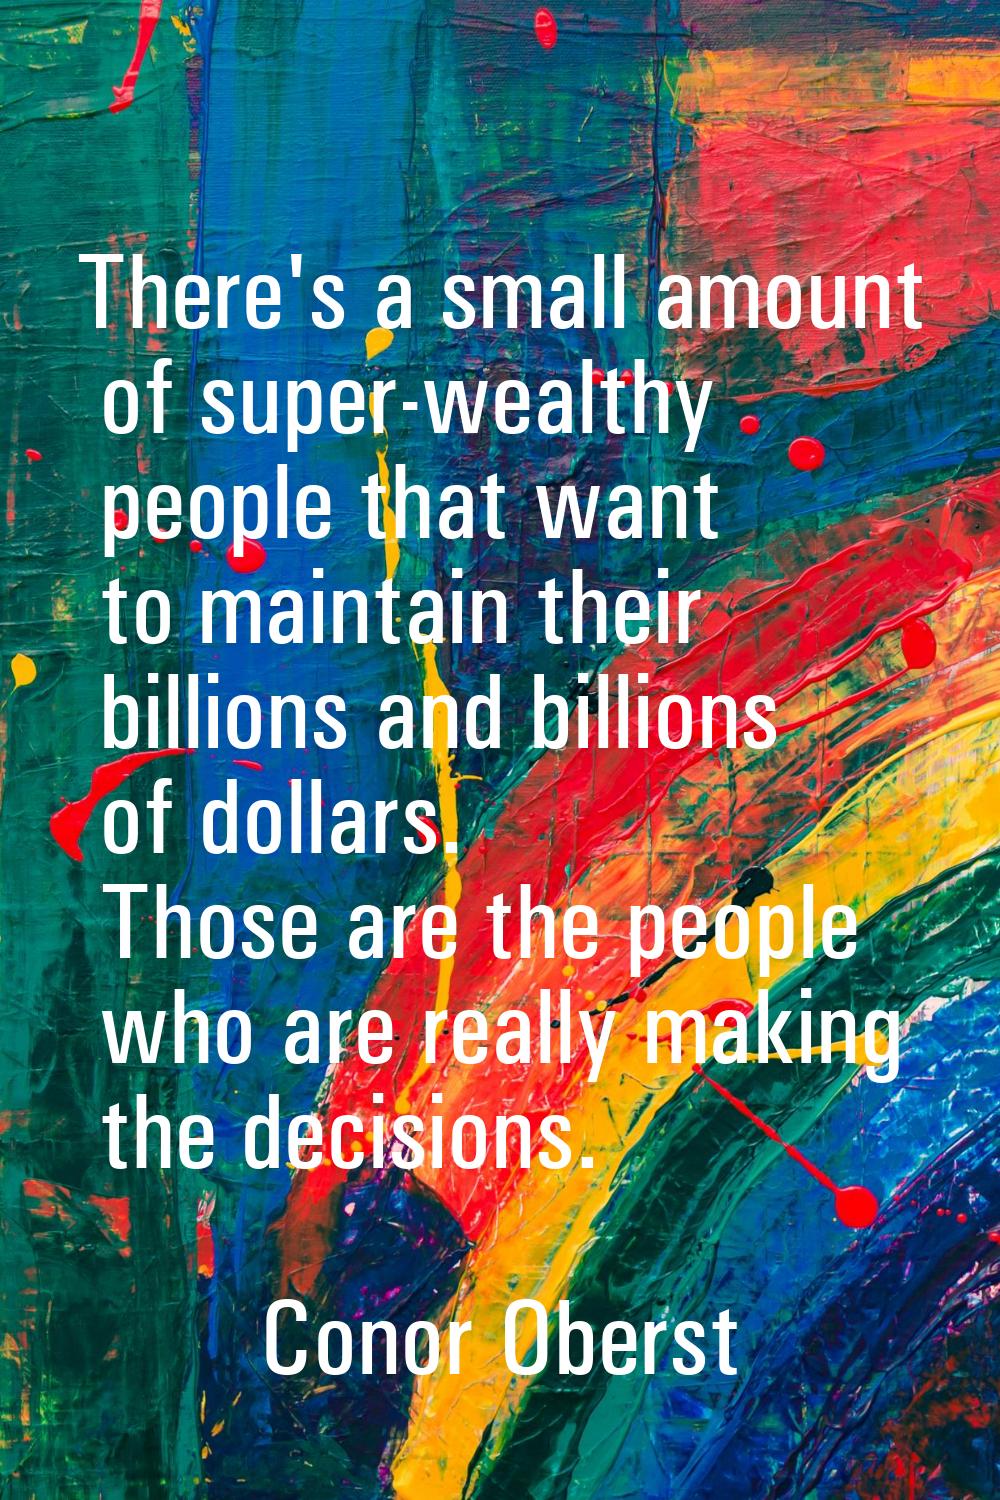 There's a small amount of super-wealthy people that want to maintain their billions and billions of